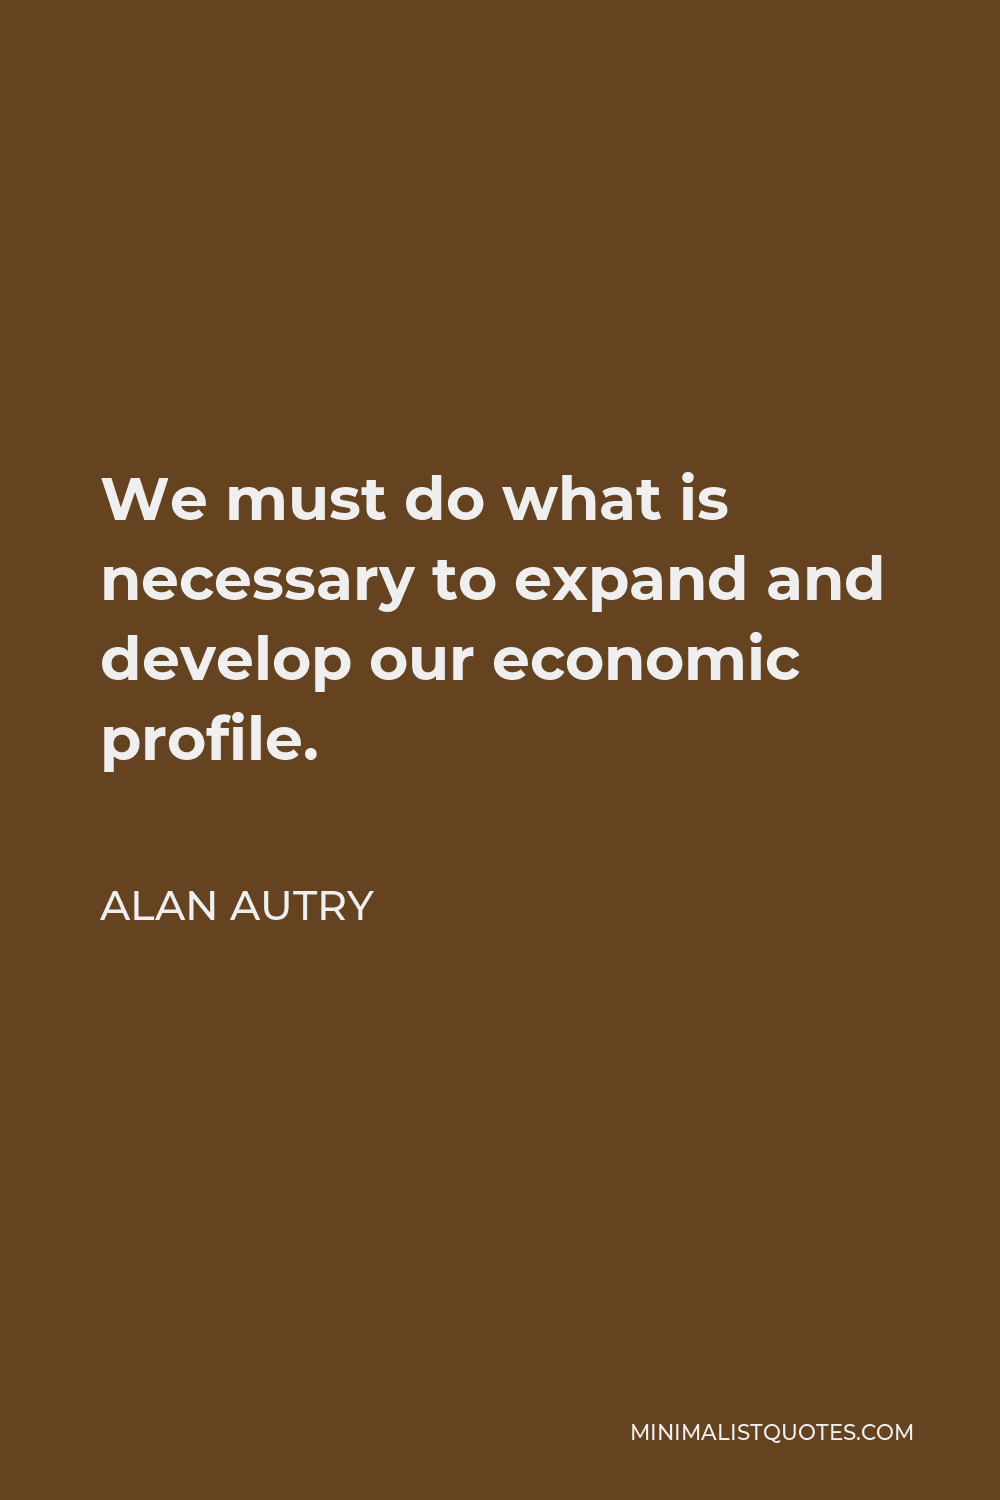 Alan Autry Quote - We must do what is necessary to expand and develop our economic profile.